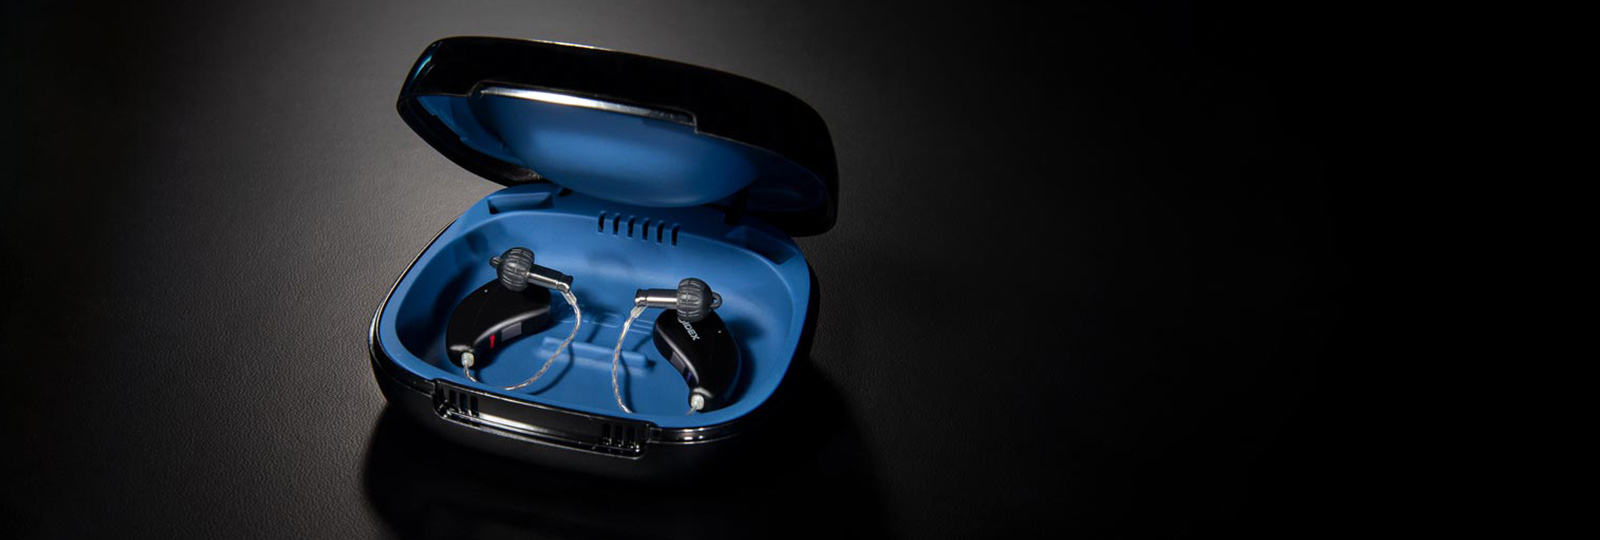 Widex Moment Hearing aids in open case